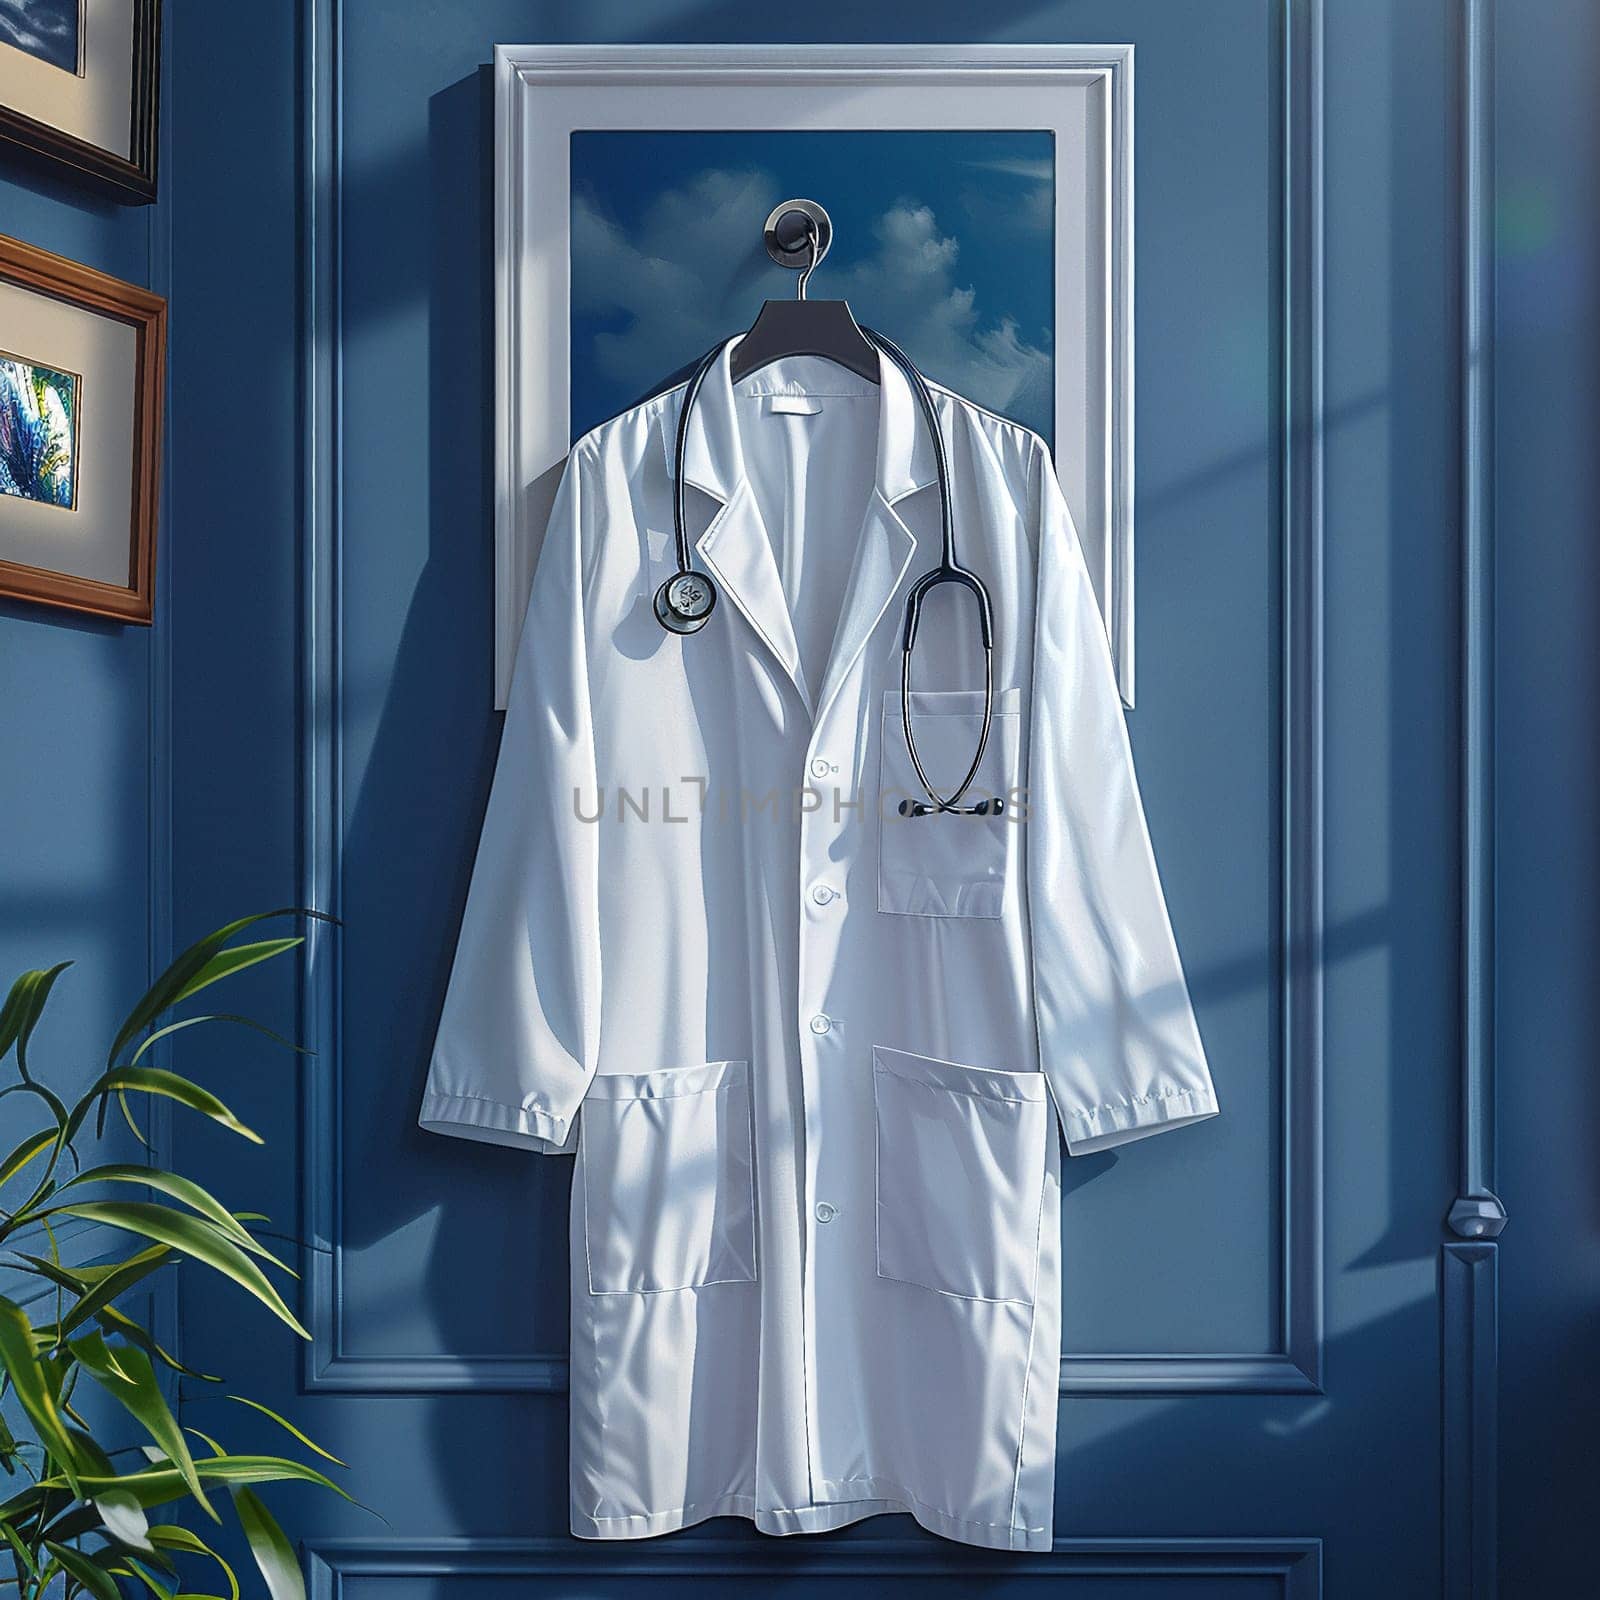 Illustration of stethoscope and white coat hanging on wall for National Doctors Day.